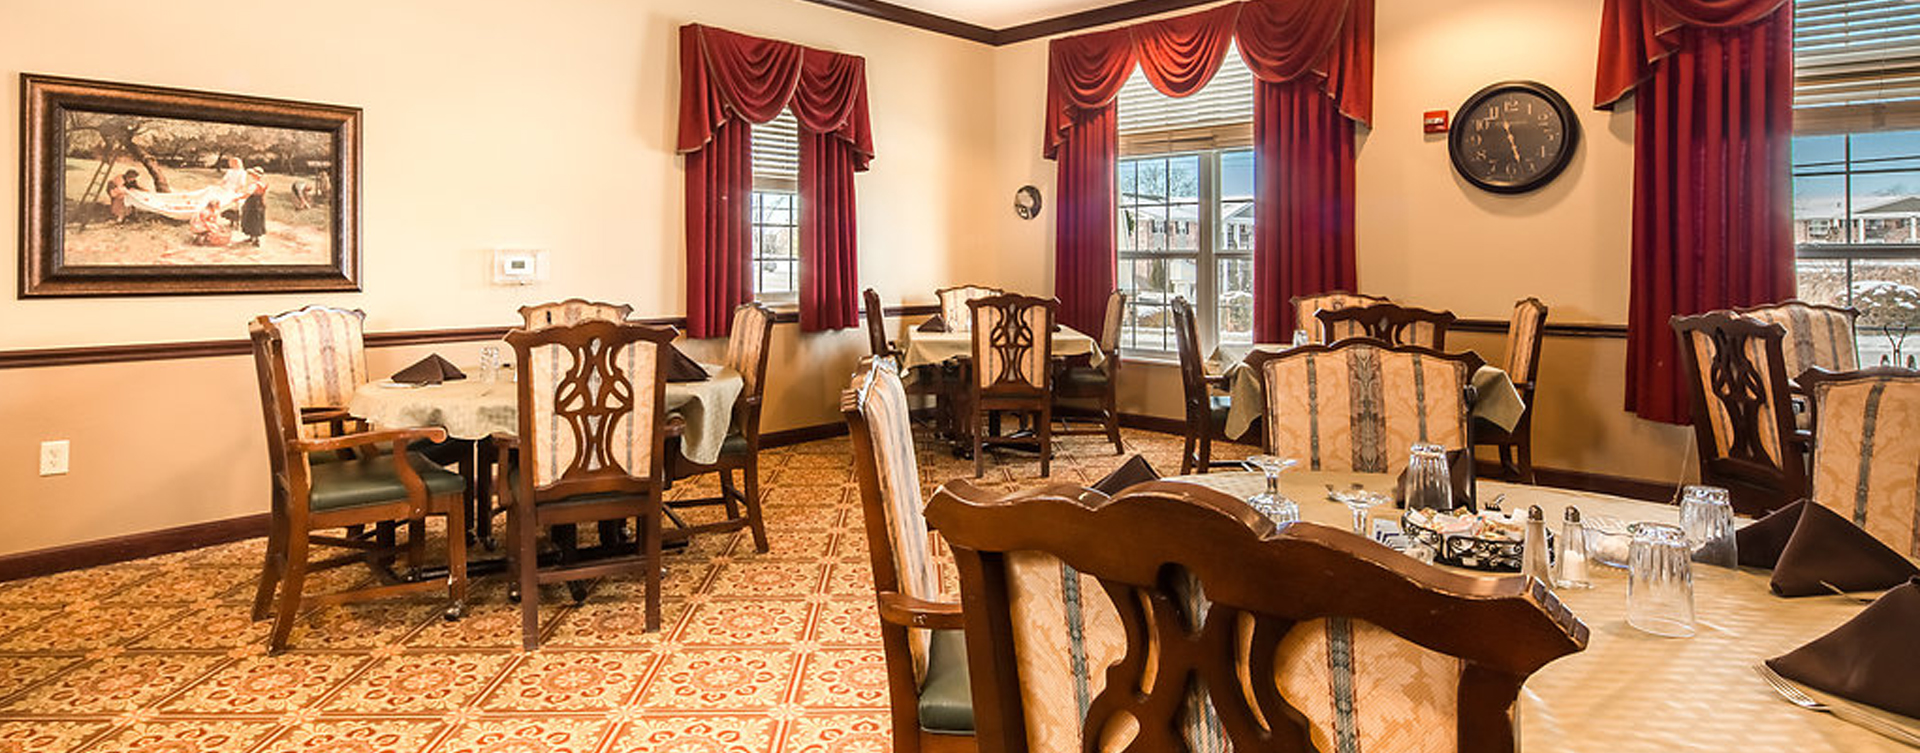 Enjoy homestyle food with made-from-scratch recipes in our dining room at Bickford of Okemos